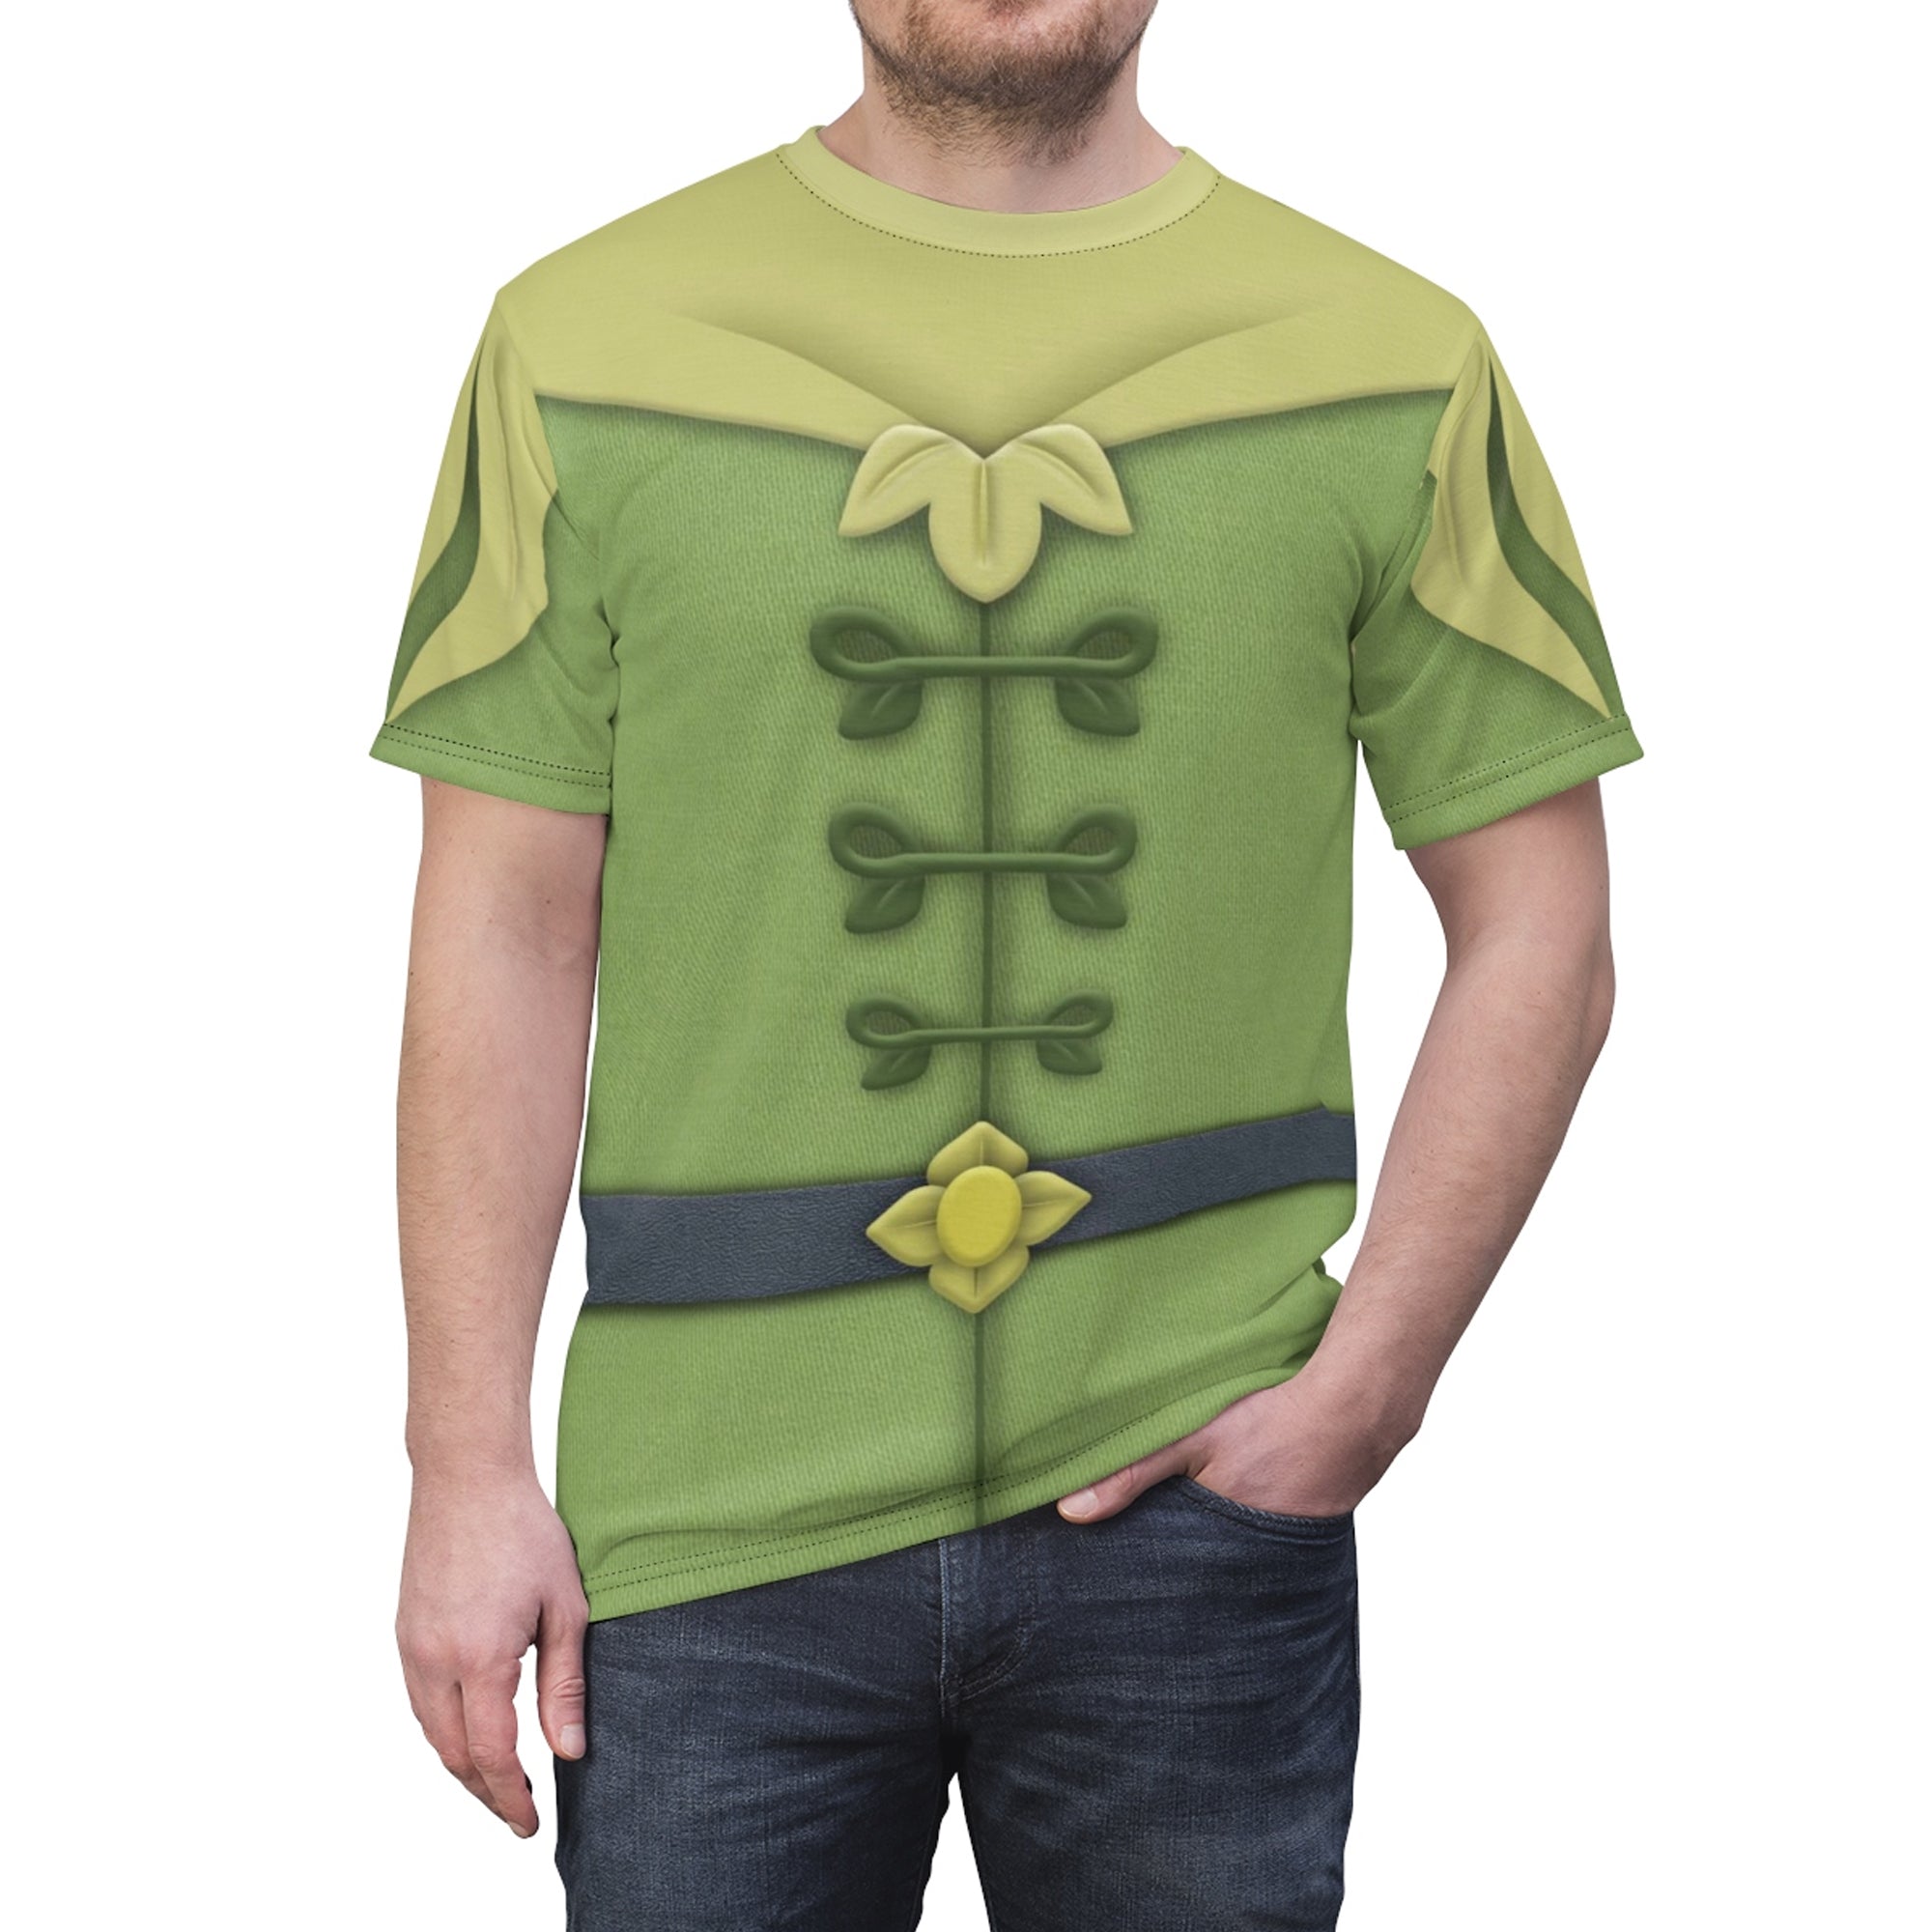 Prince Naveen Princess And The Frog Costume T-Shirt For Men